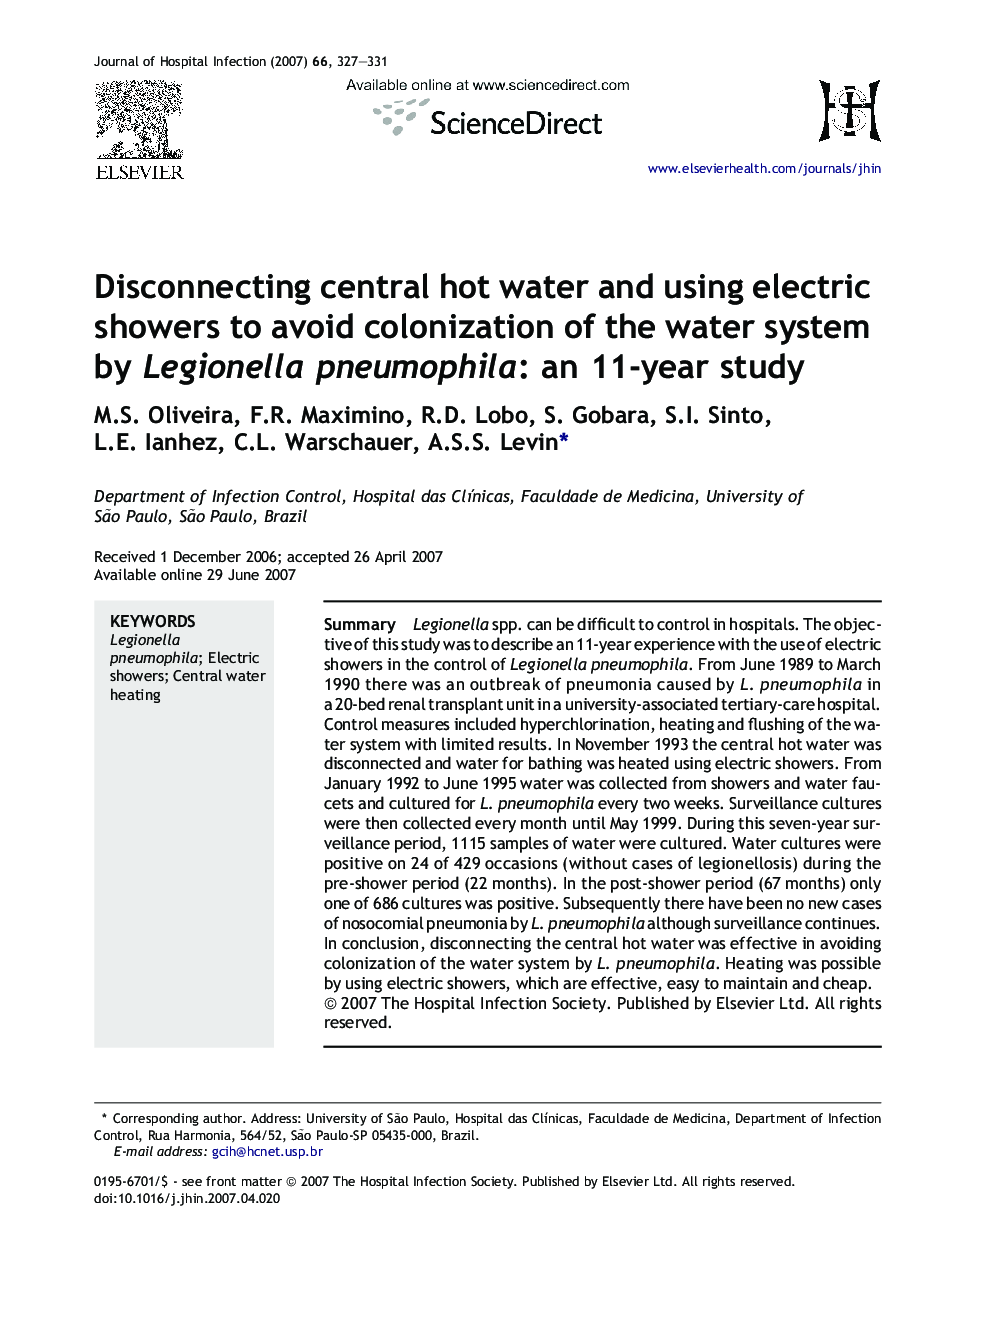 Disconnecting central hot water and using electric showers to avoid colonization of the water system by Legionella pneumophila: an 11-year study